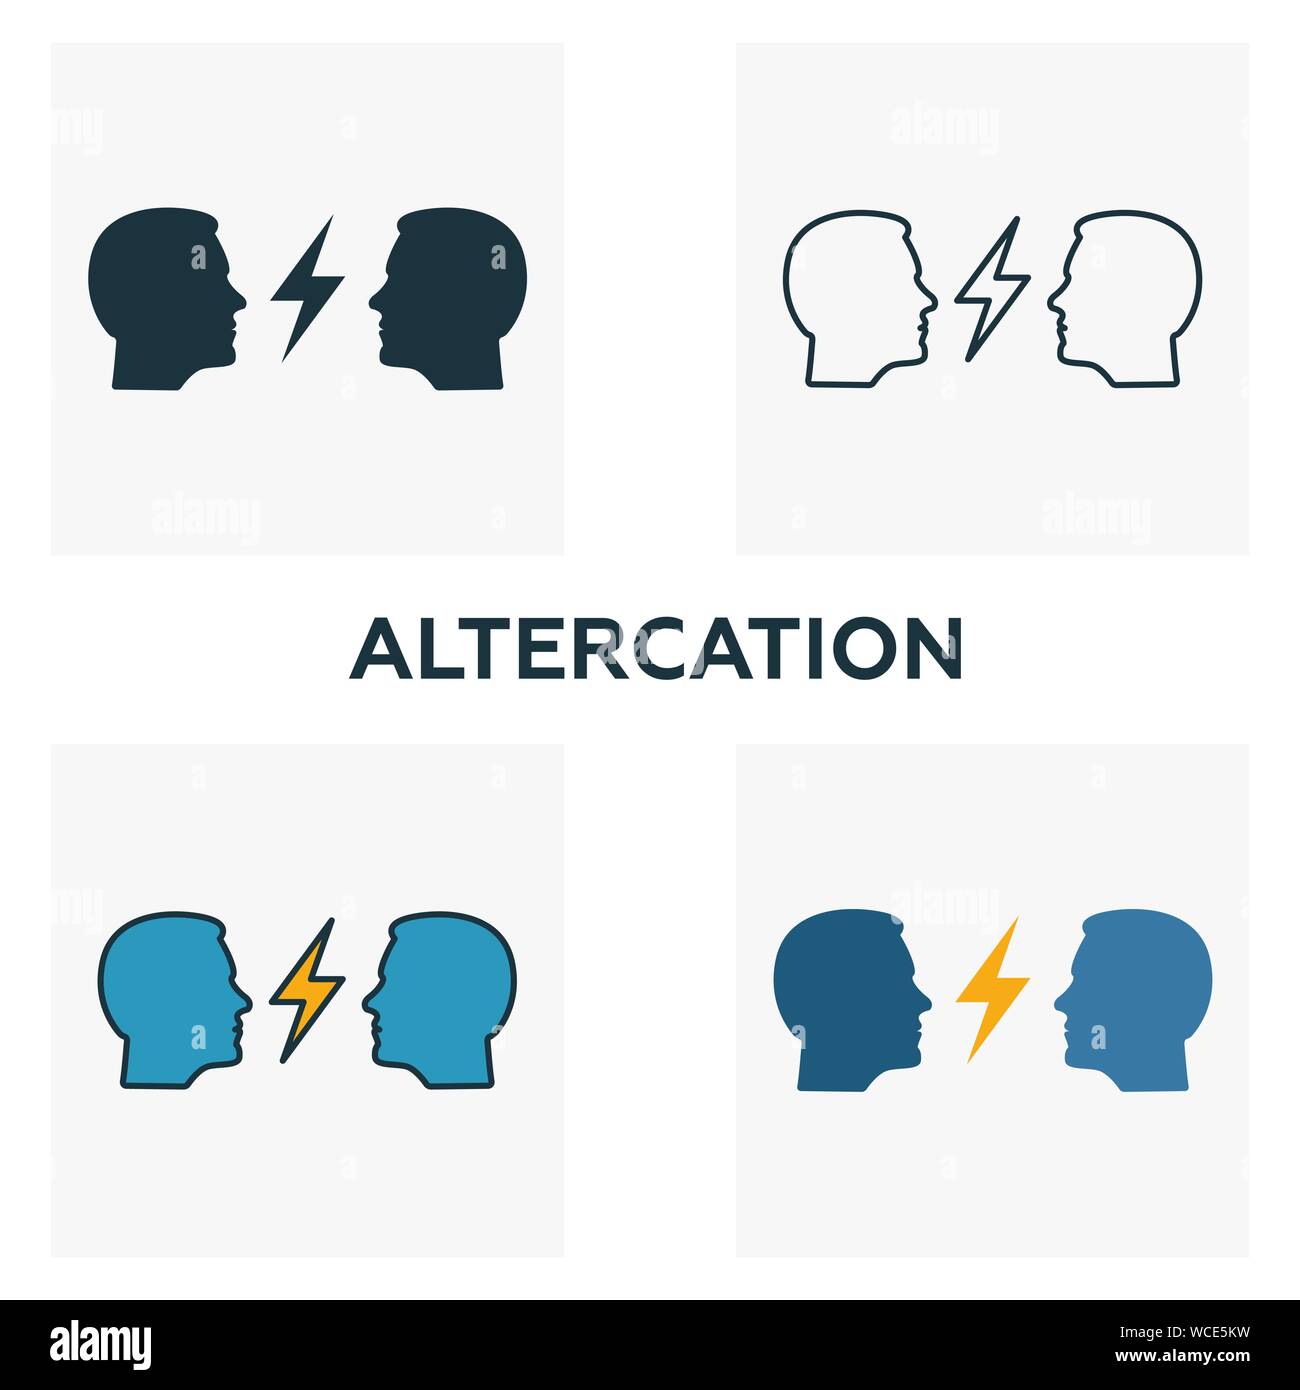 Altercation icon set. Four elements in diferent styles from business ethics icons collection. Creative altercation icons filled, outline, colored and Stock Vector